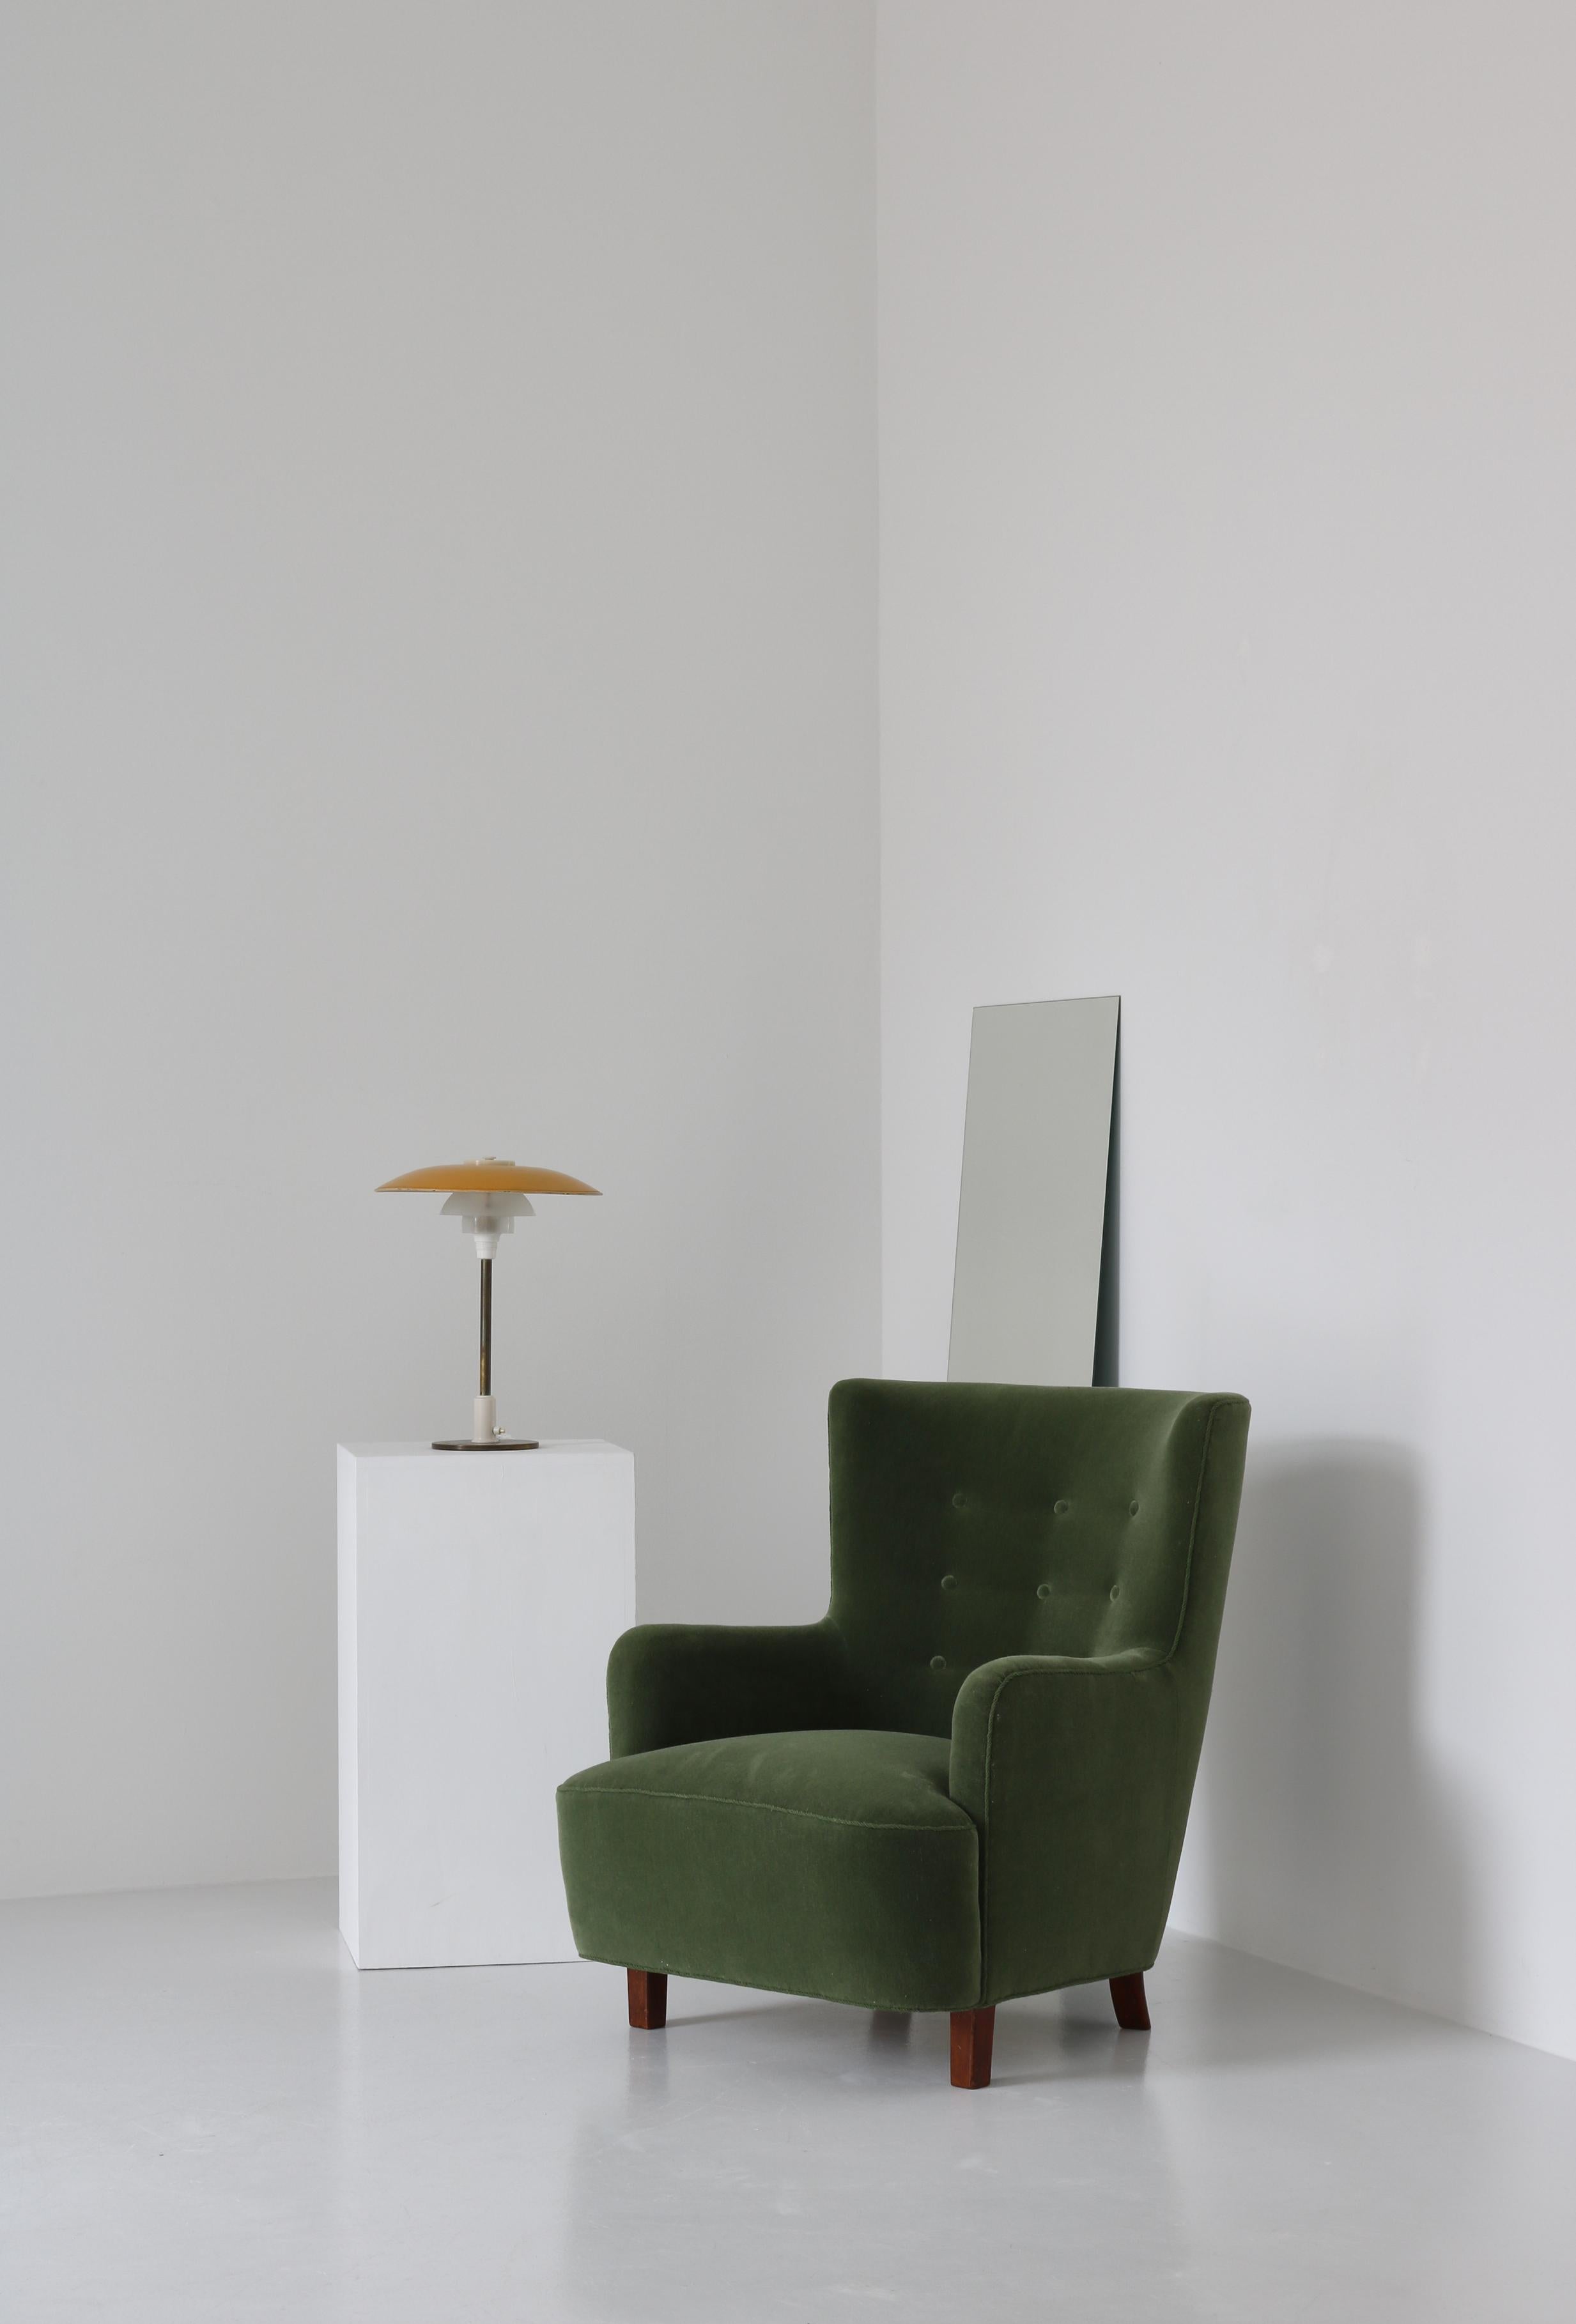 Beautiful Scandinavian Modern easy chair made in Denmark in the 1940s and attributed to Fritz Hansen. Legs in stained beech. The chair has been reupholstered in green mohair velvet.

Grand Mohair by Danish Art Weaving:
Mohair is made from the hair